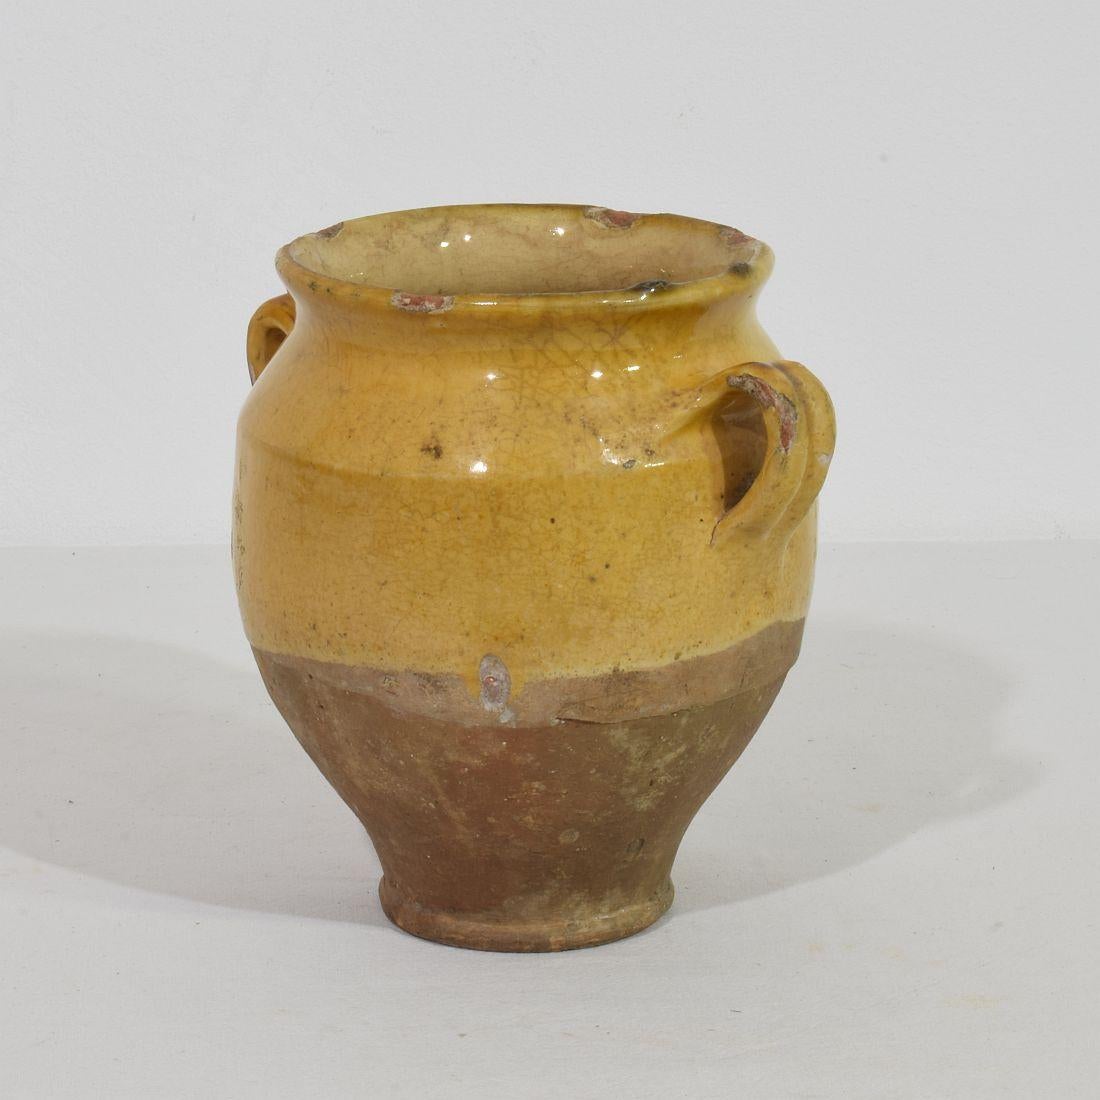 Beautiful small confit jar with its characteristic yellow glaze. 
Confit jars were used primarily in the South of France for the preservation of meats such as duck or goose for dishes such as cassoulet or foie gras. The bottom halves were left